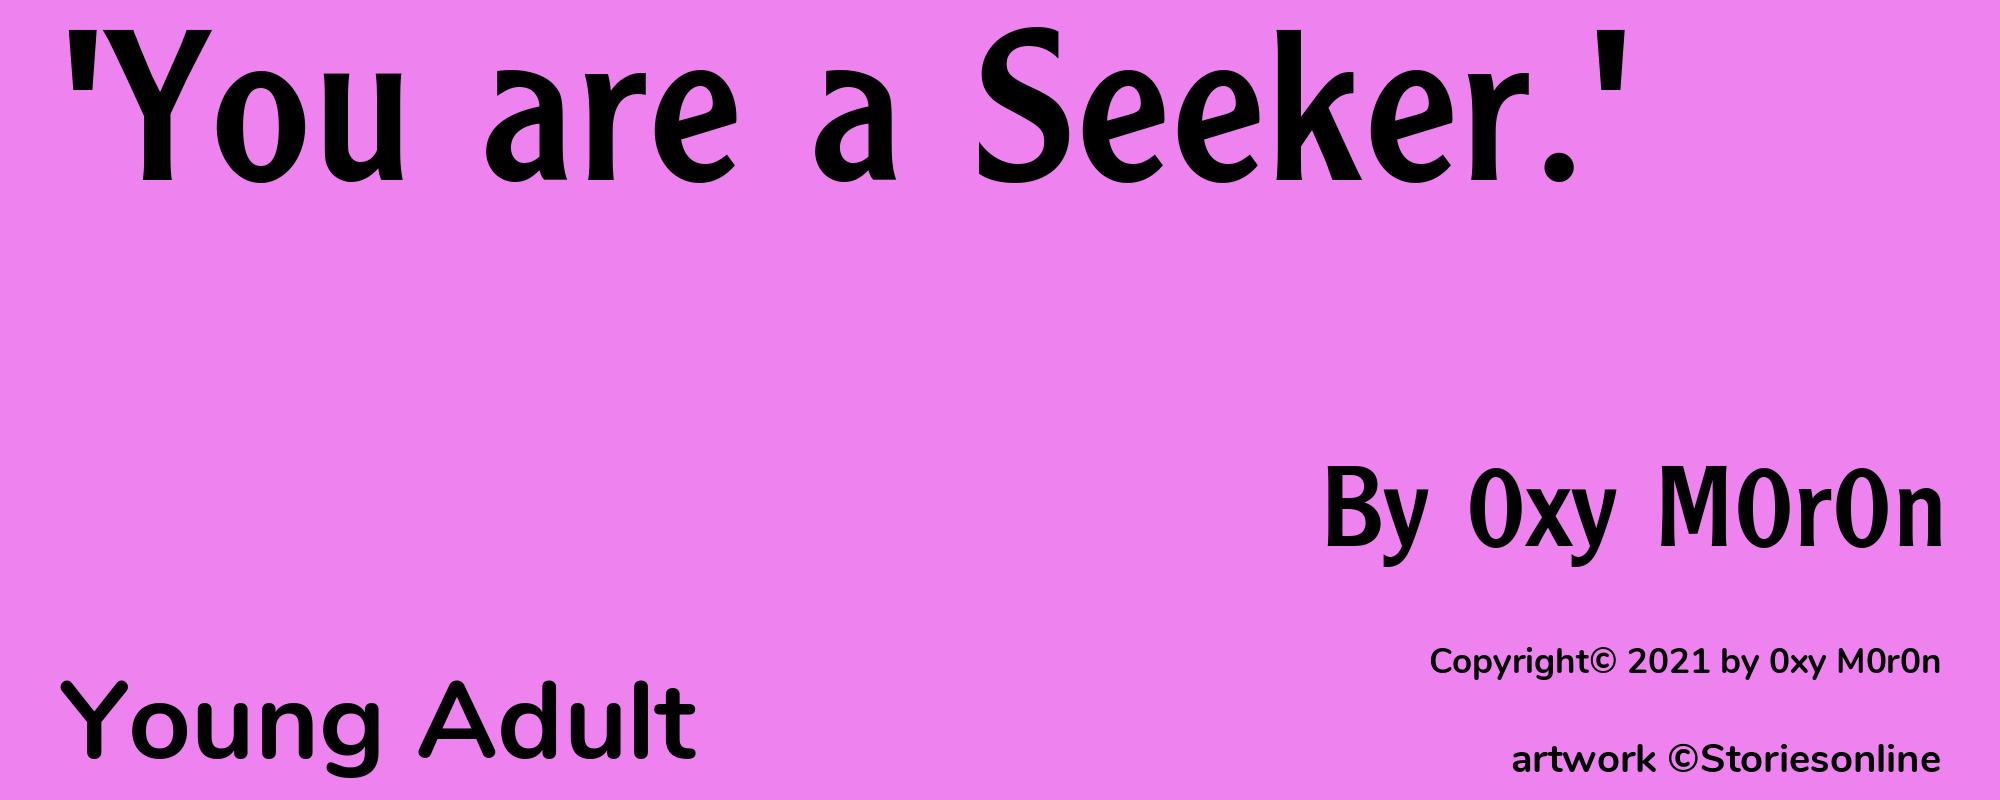 'You are a Seeker.' - Cover